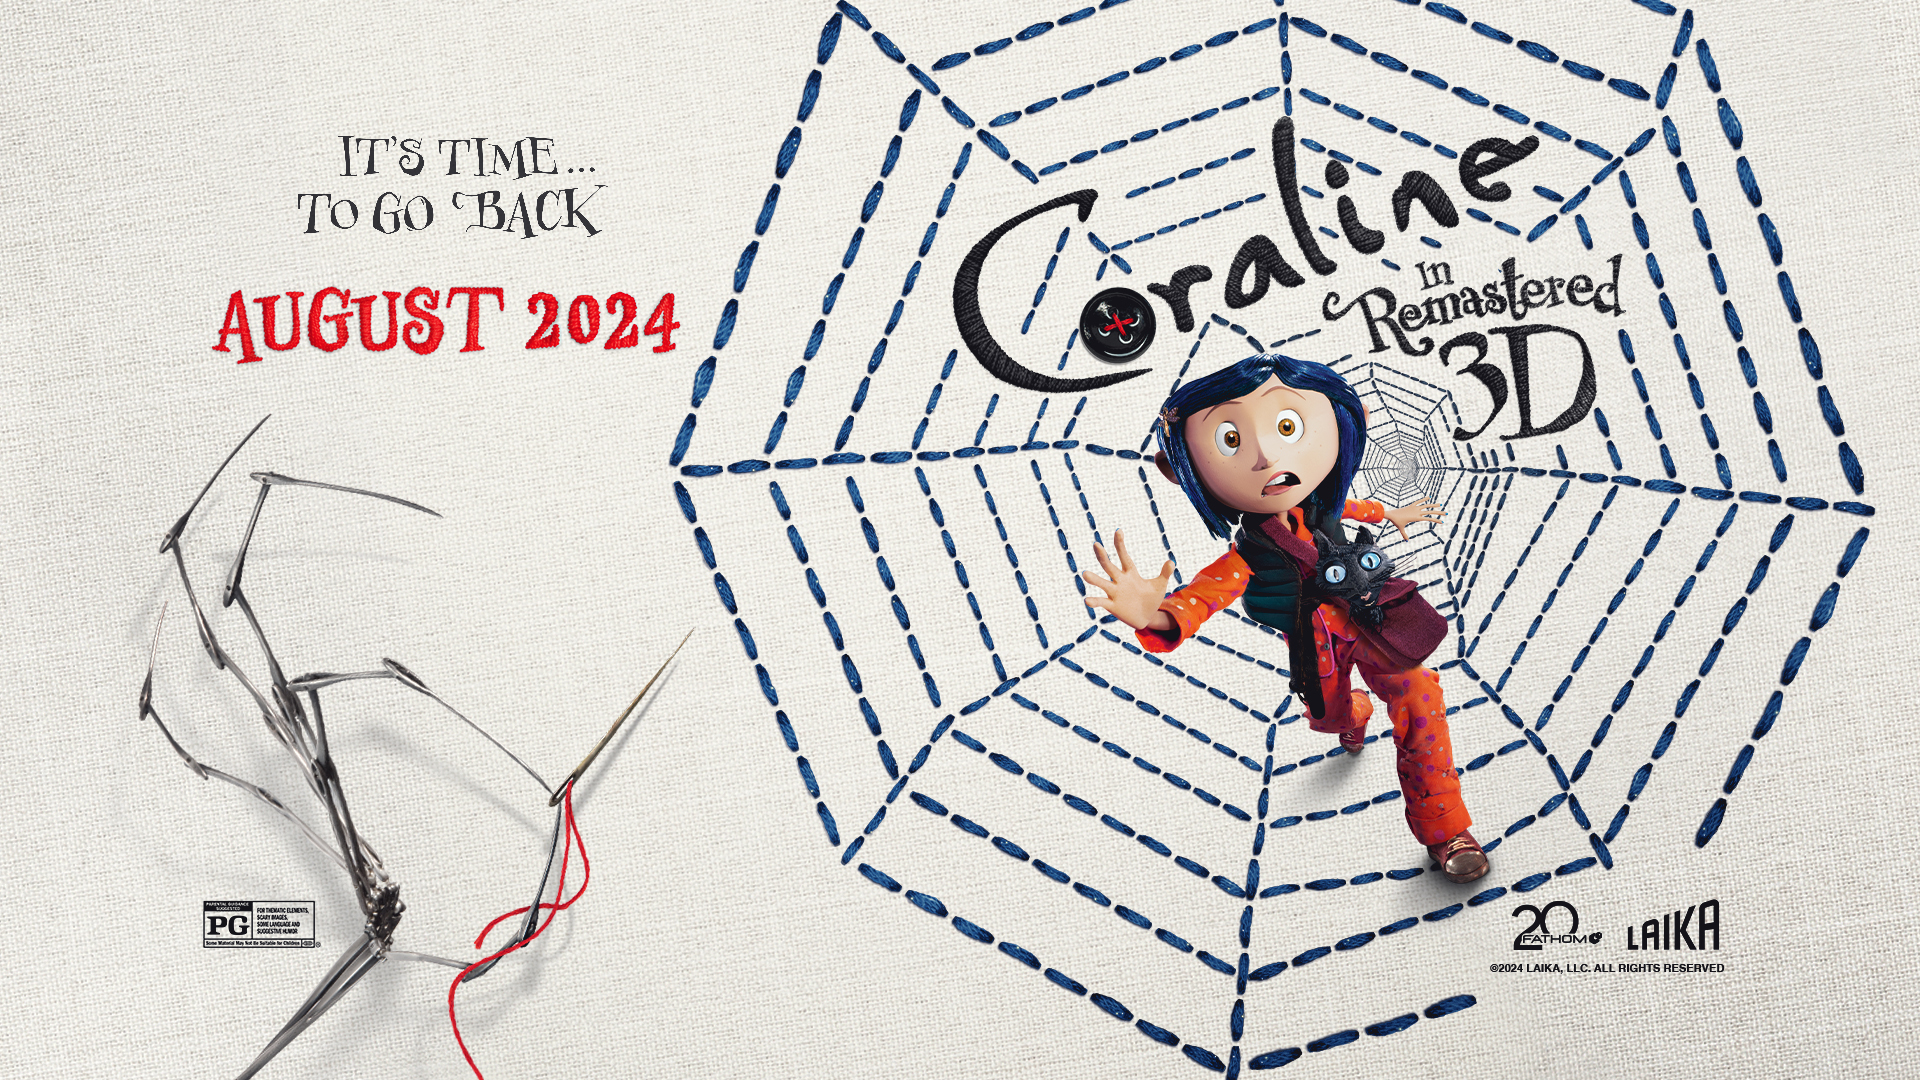 LAIKA BRINGING NEWLY REMASTERED 3D CORALINE BACK TO THEATERS GLOBALLY TO CELEBRATE 15th ANNIVERSARY COURTESY OF FATHOM